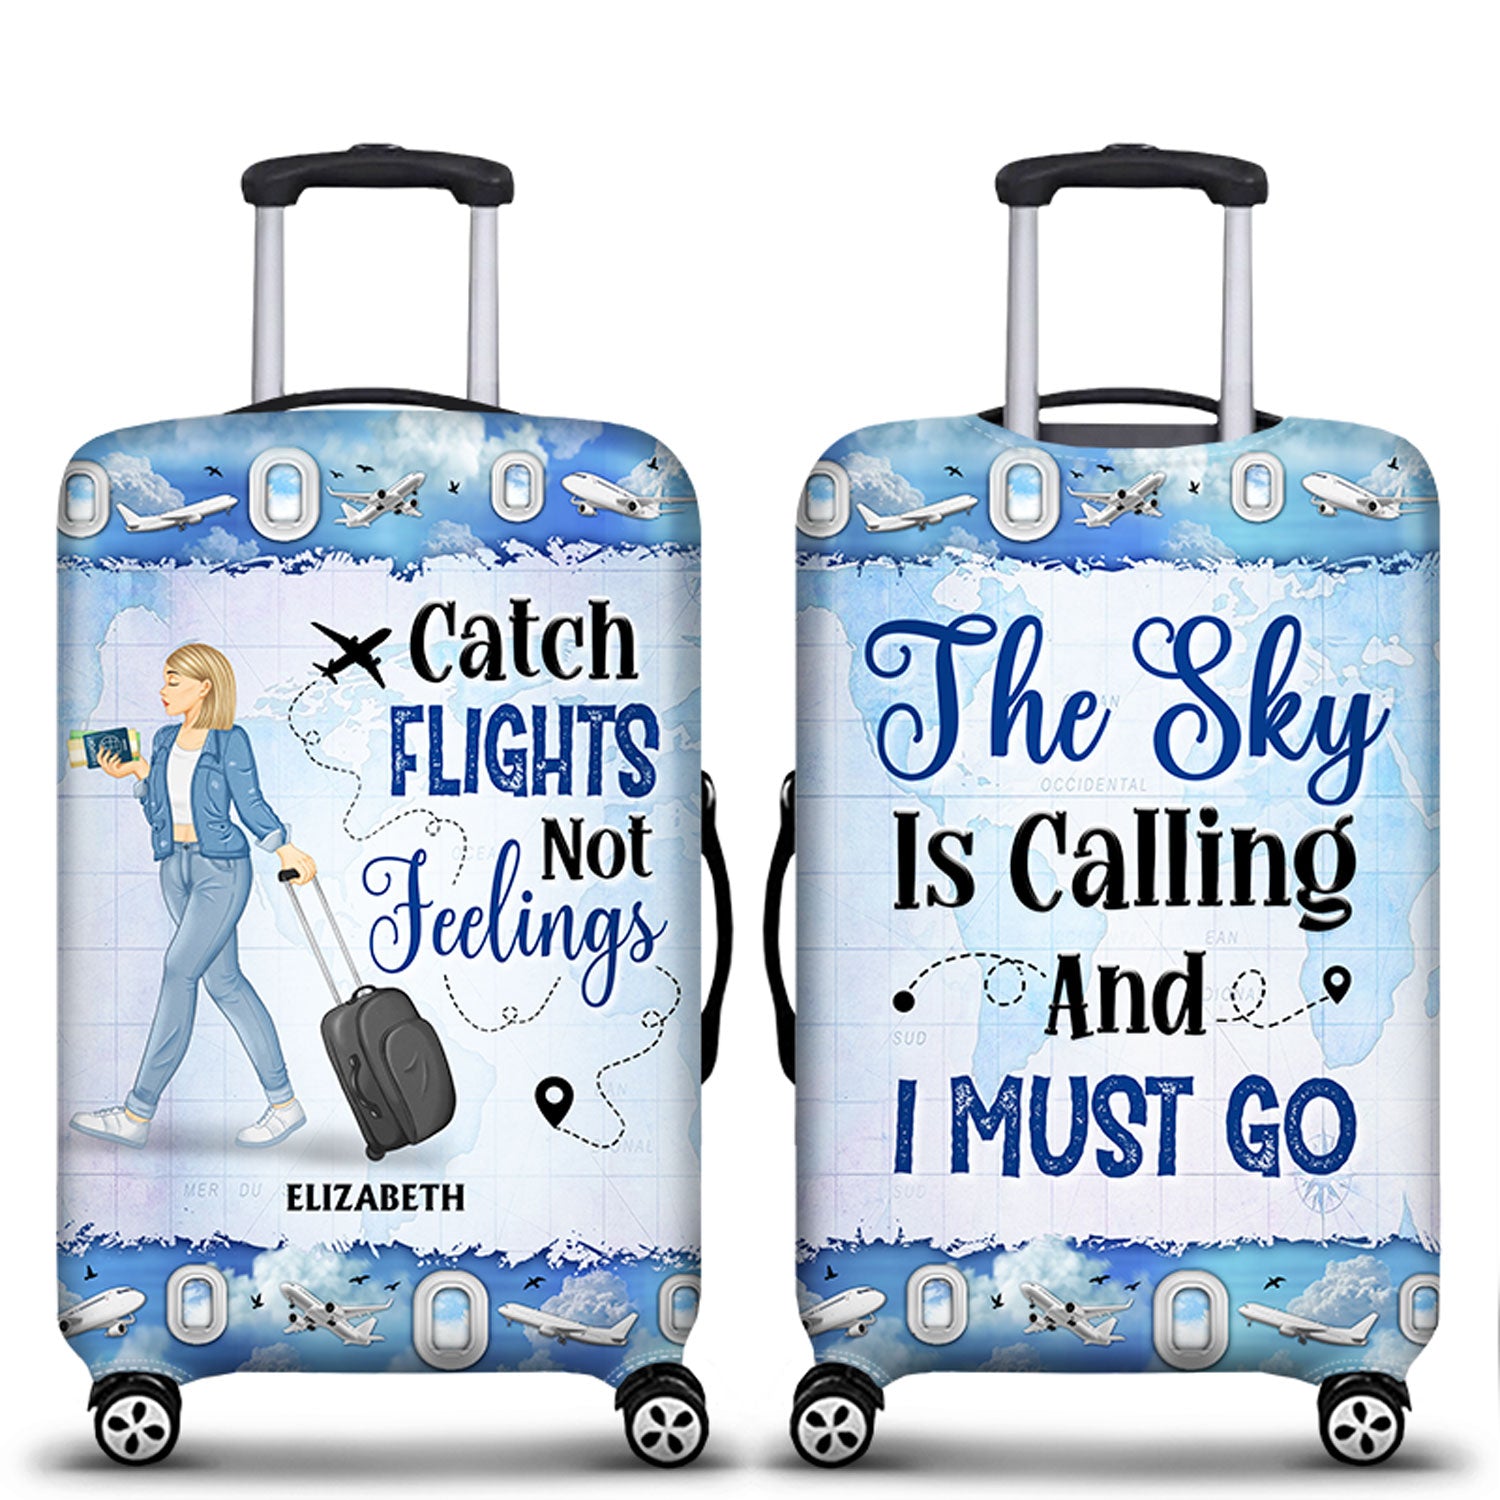 Catch Flights Not Feelings - Birthday Gift For Him, Her, Trippin', Vacation Lovers - Personalized Custom Luggage Cover